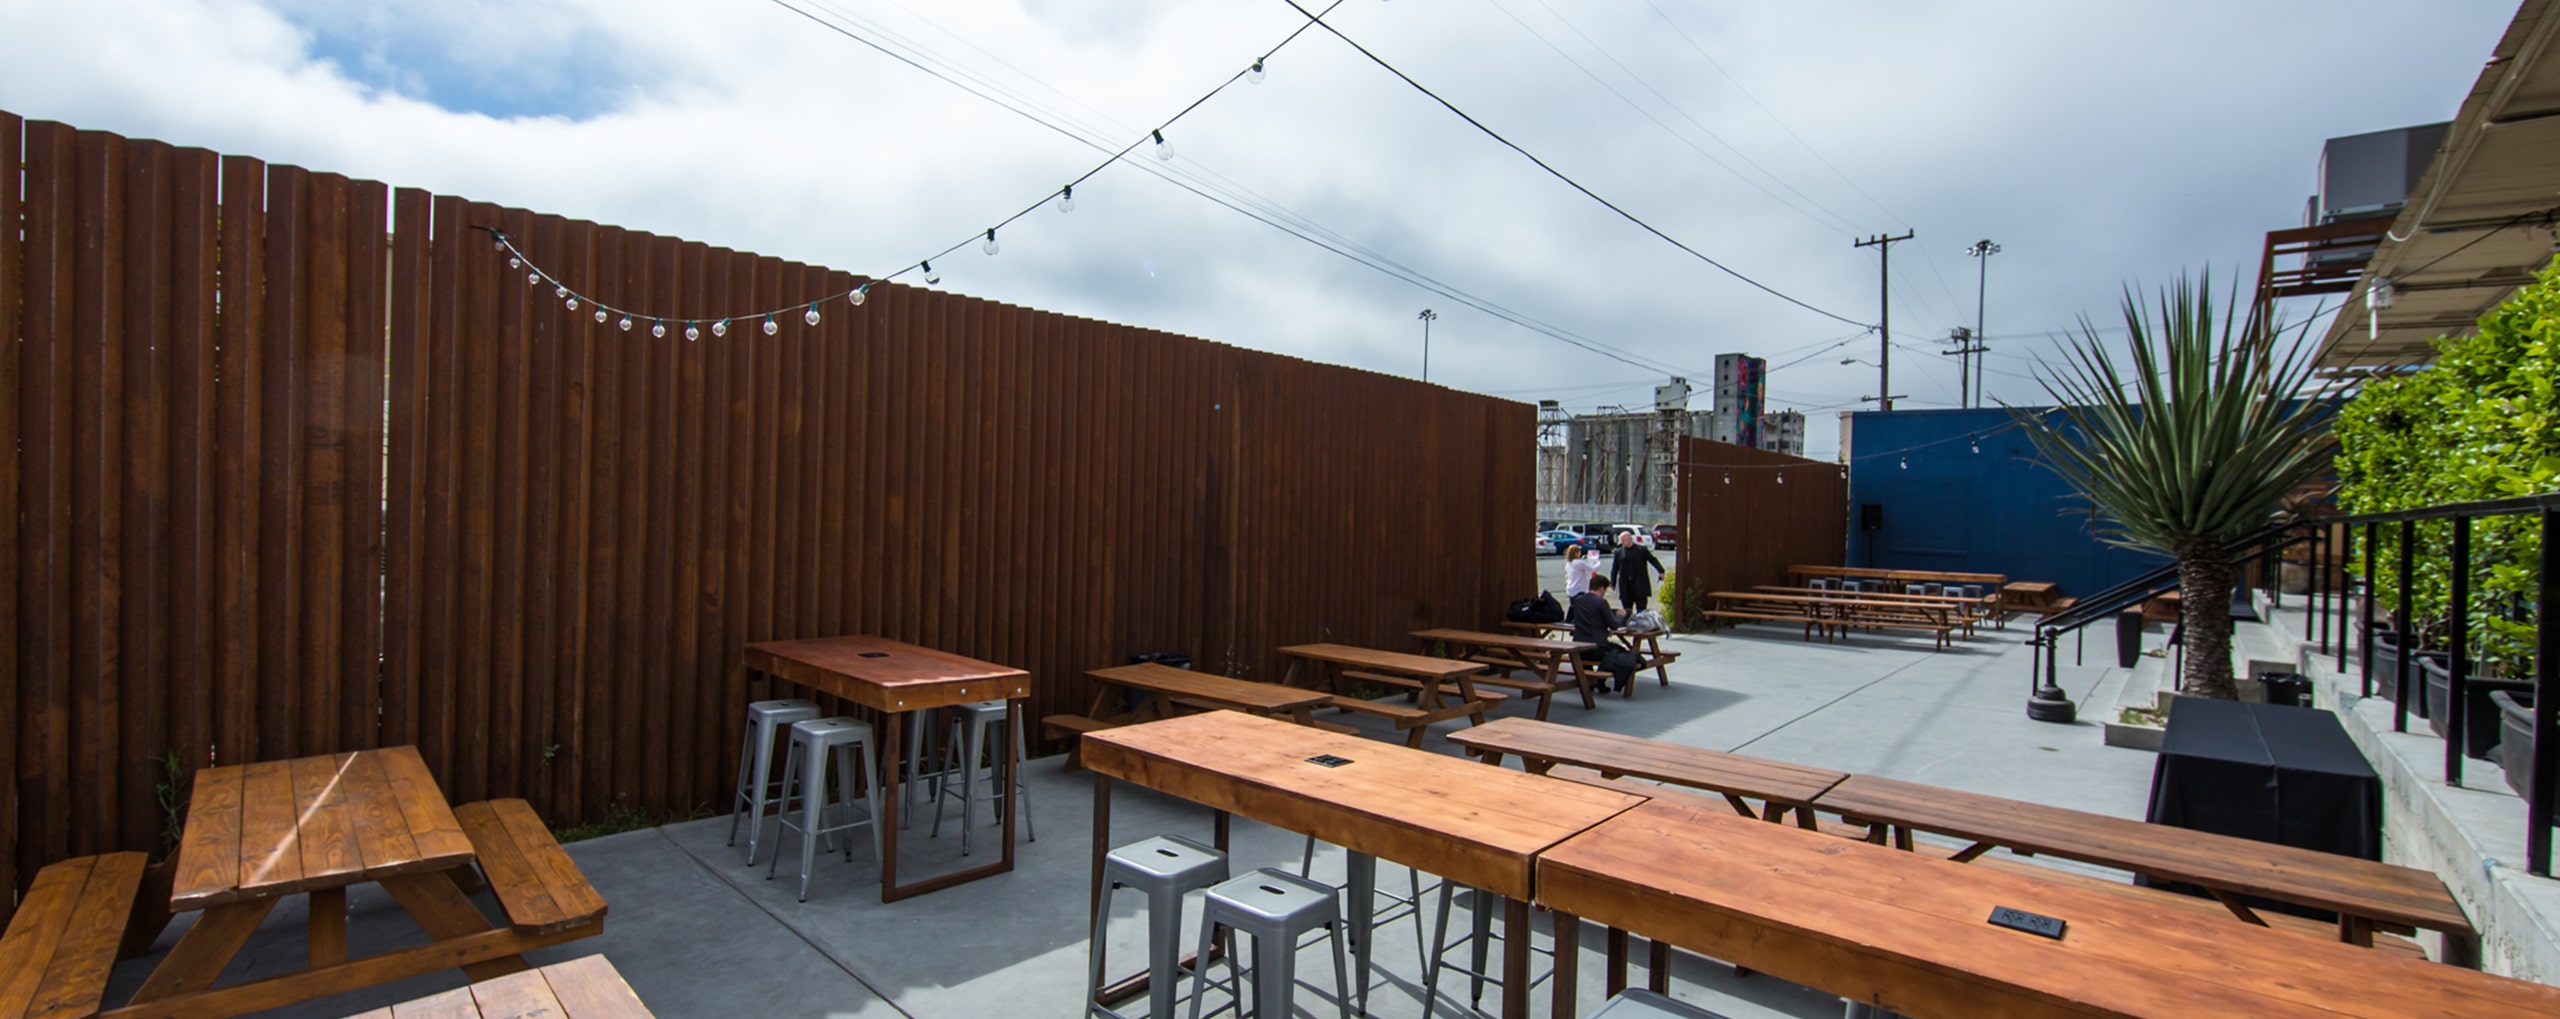 San Francisco Event Venue, The Midway, Exterior, Patio, Vacant, Day